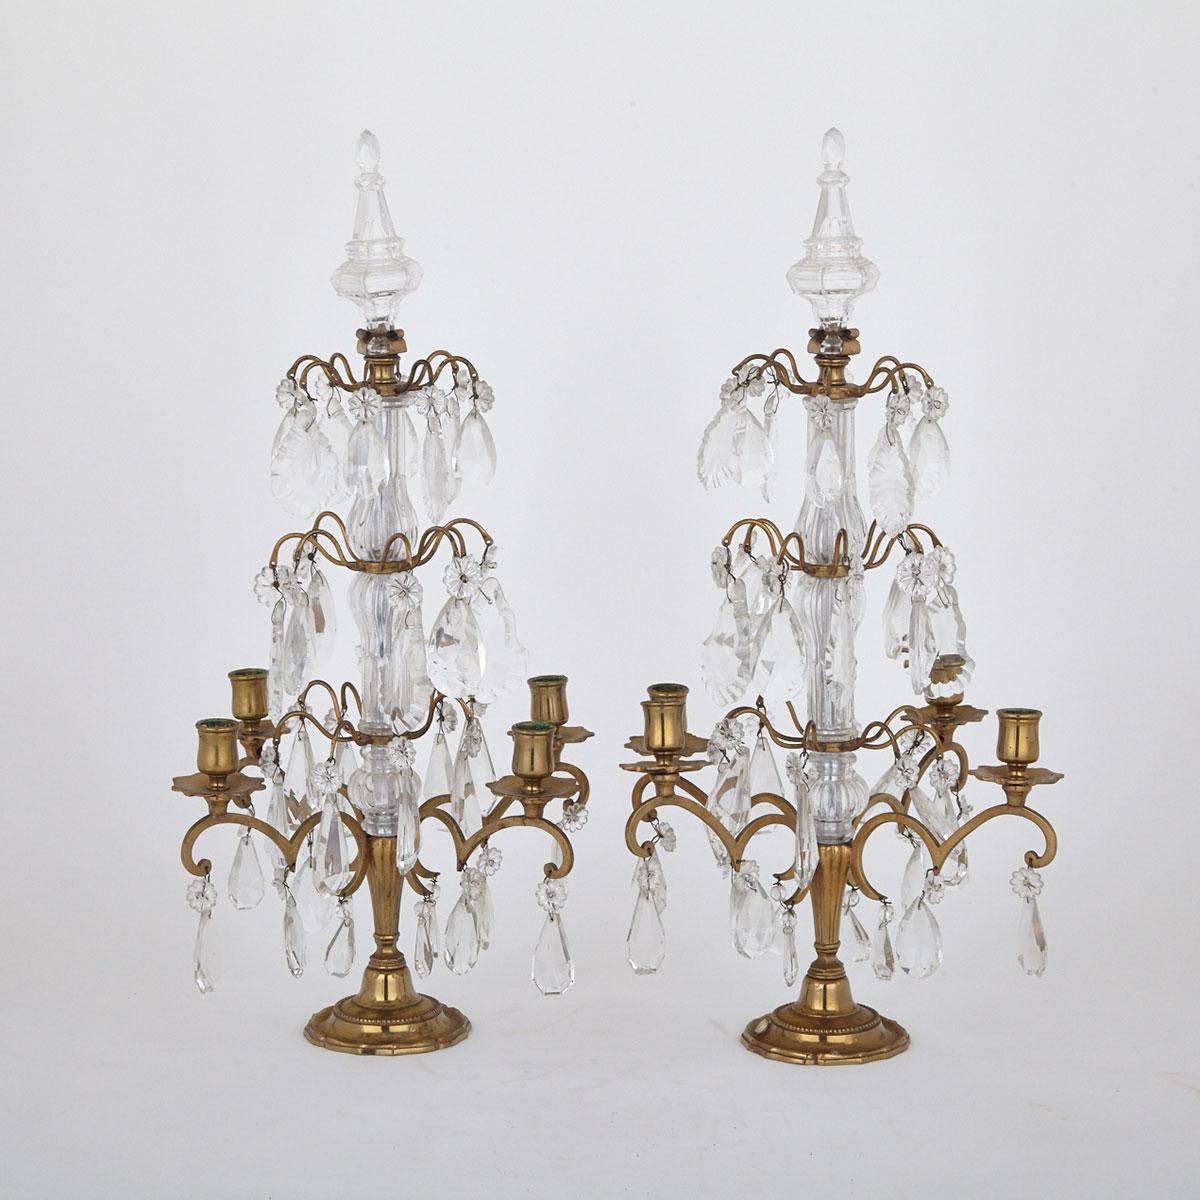 Pair of French Gilt Brass and Cut Glass Four-Light Lustre Candelabra, 19th/early 20th century